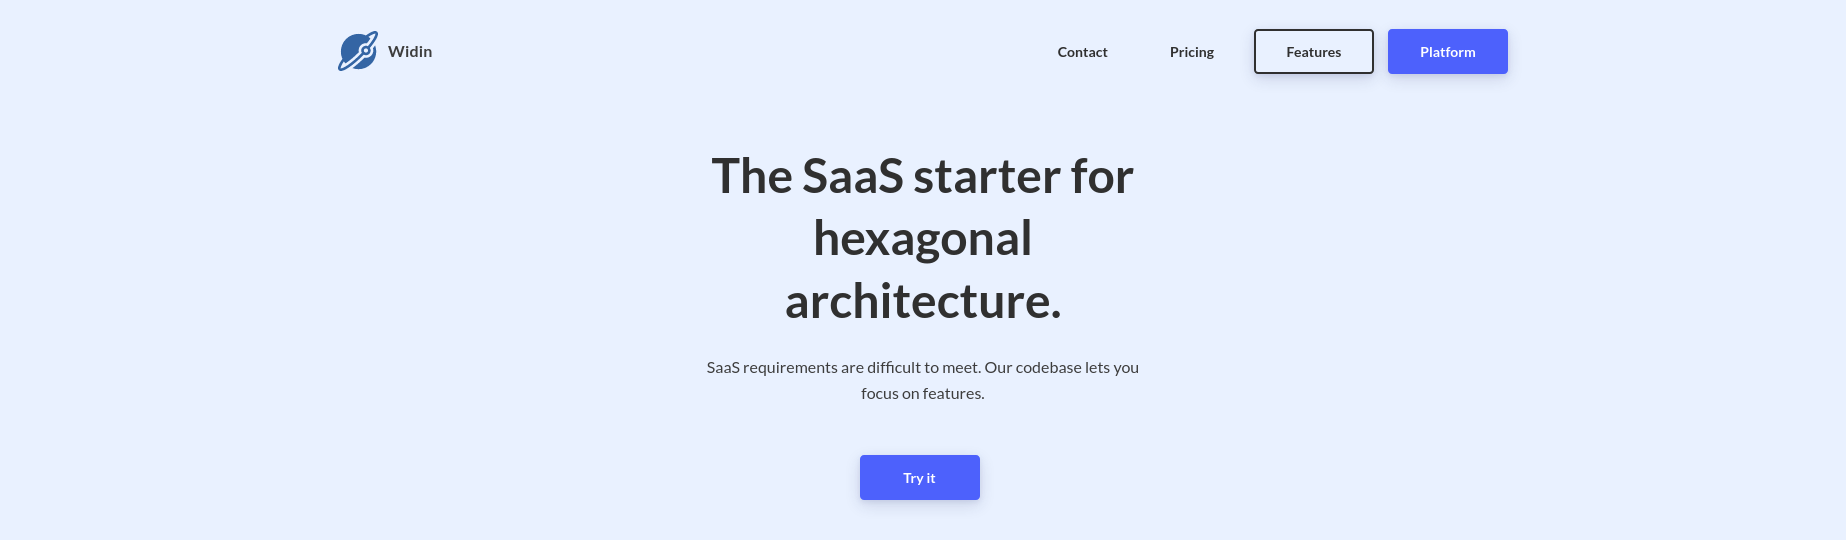 Review Widin: The SaaS starter for hexagonal architecture. - Appvizer